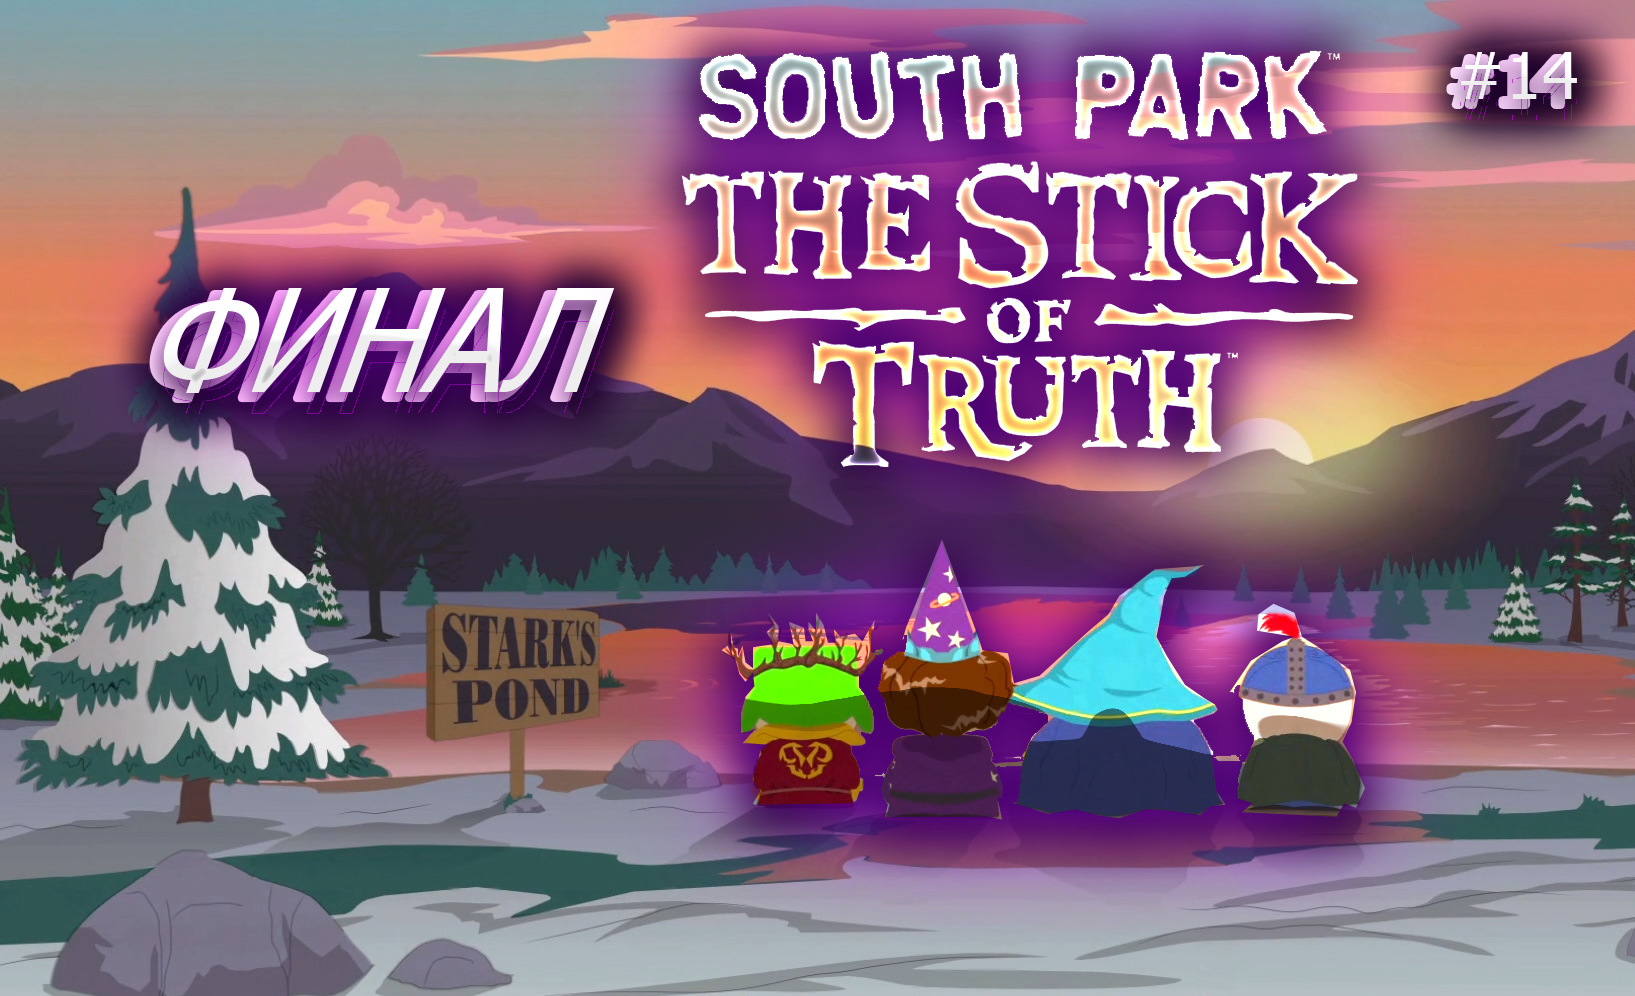 South Park: The Stick of Truth #14. ФИНАЛ.